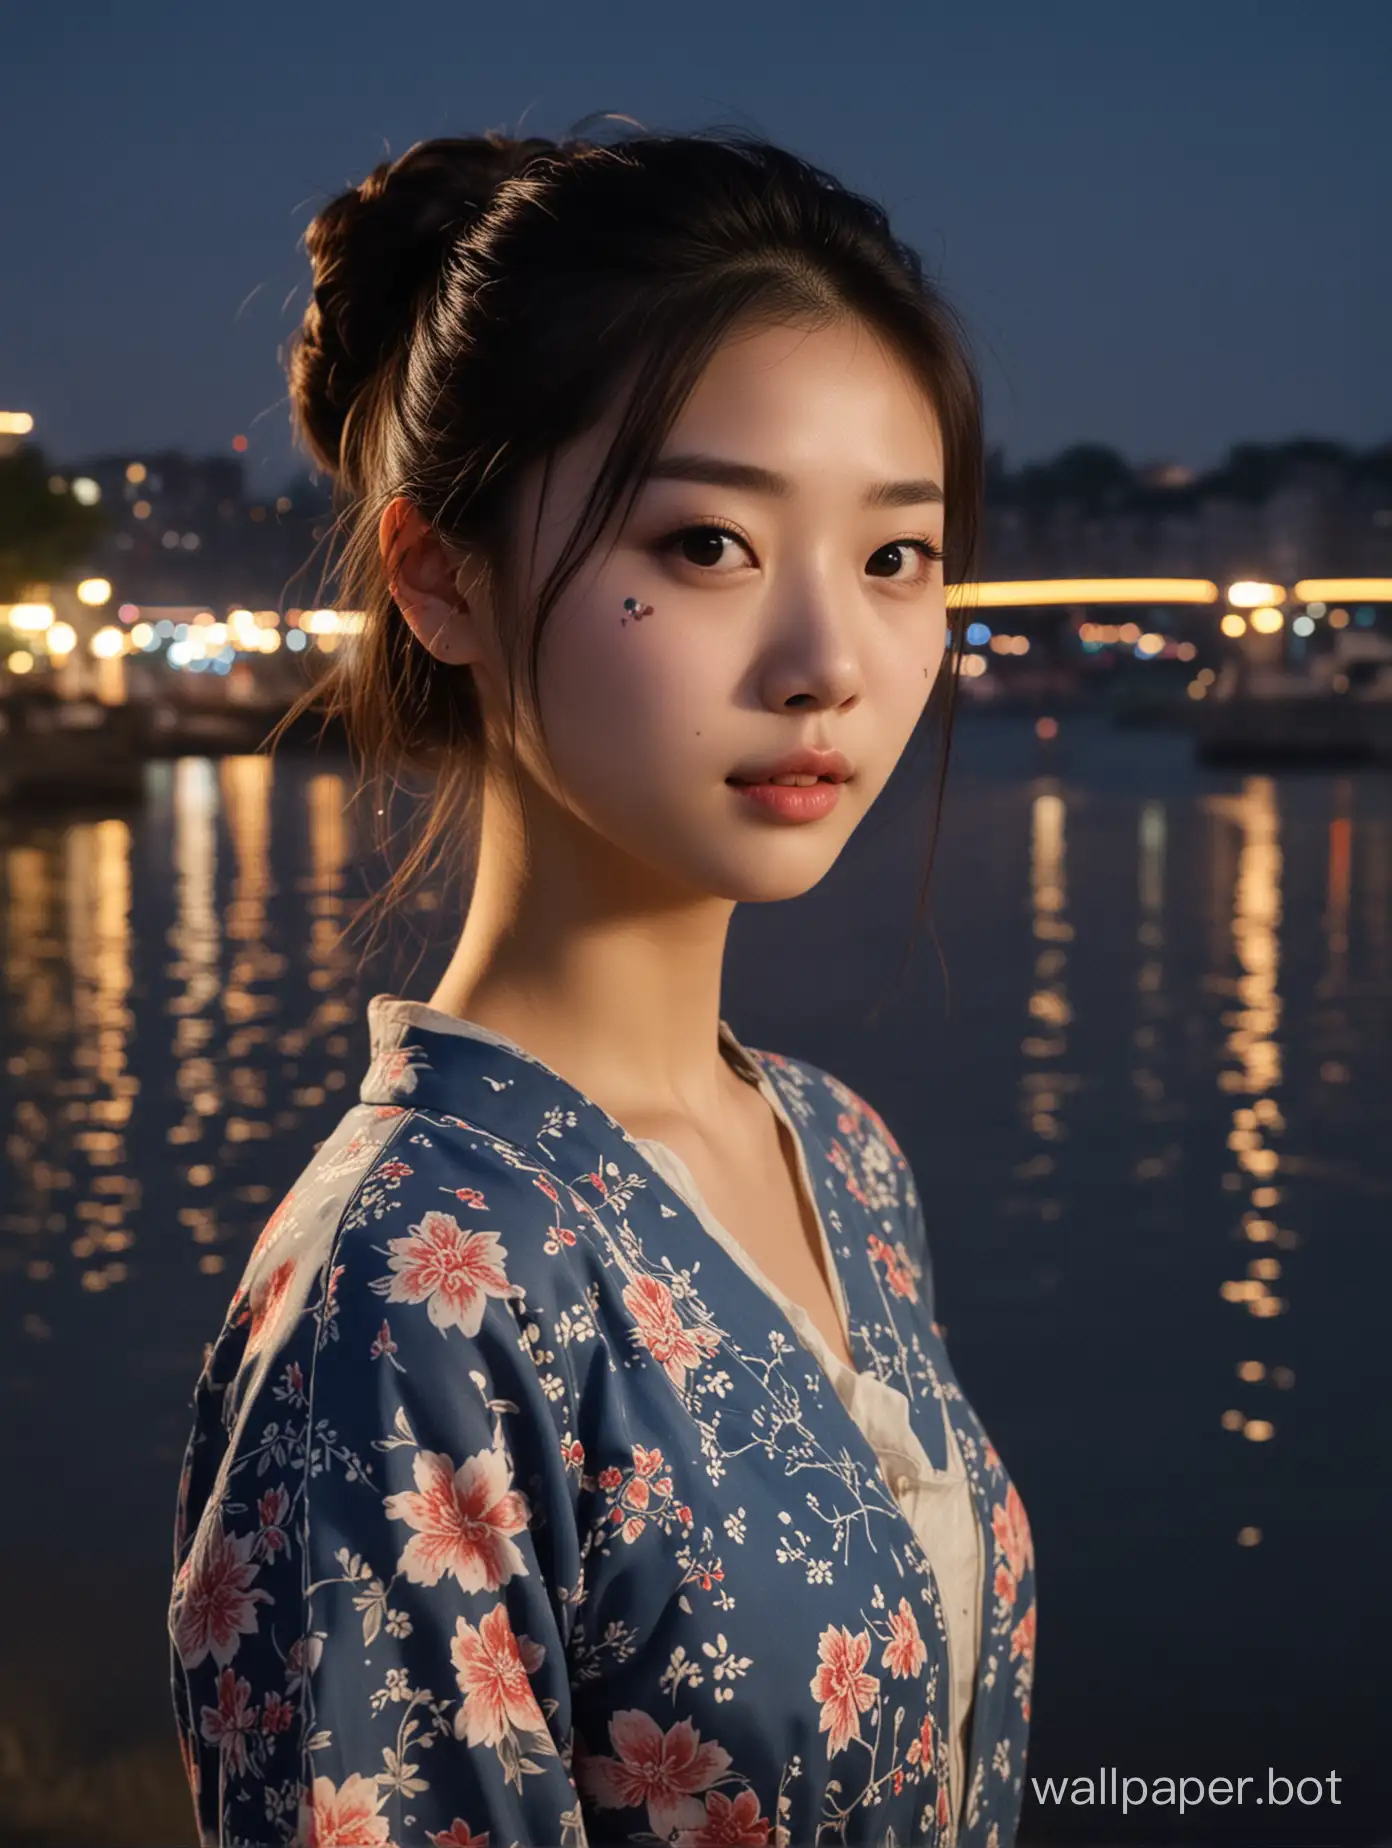 At night, the Chinese girl with a pattern on her face stood by the river watching the scenery